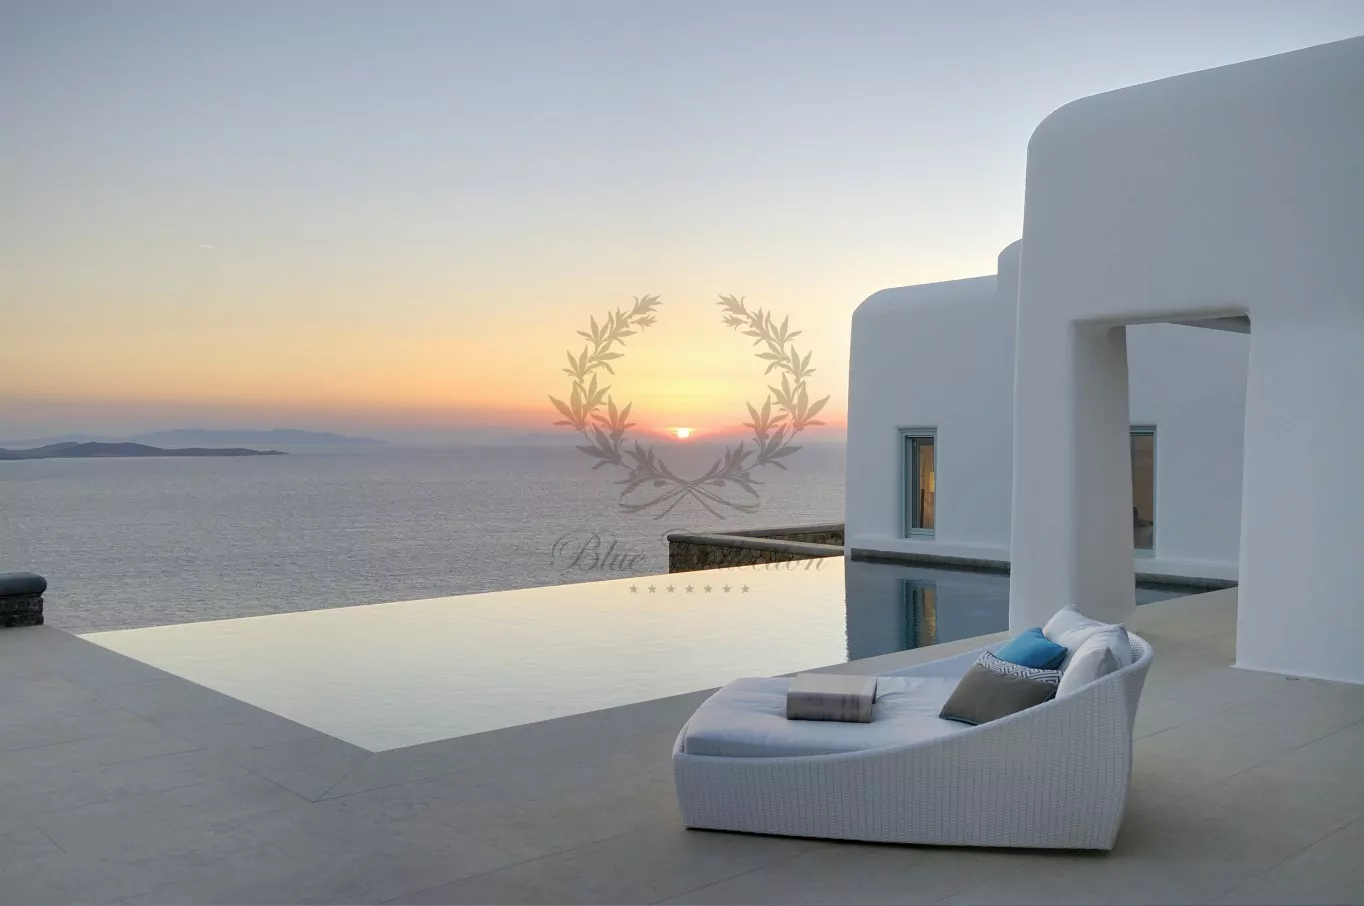 Superior Villa for Rent in Mykonos  Greece | Pouli | Private Pool | Amazing Sunset and Sea views | Sleeps 18 | 9 Bedrooms | 9 Bathrooms | REF: 180412169 | CODE: PLV-2